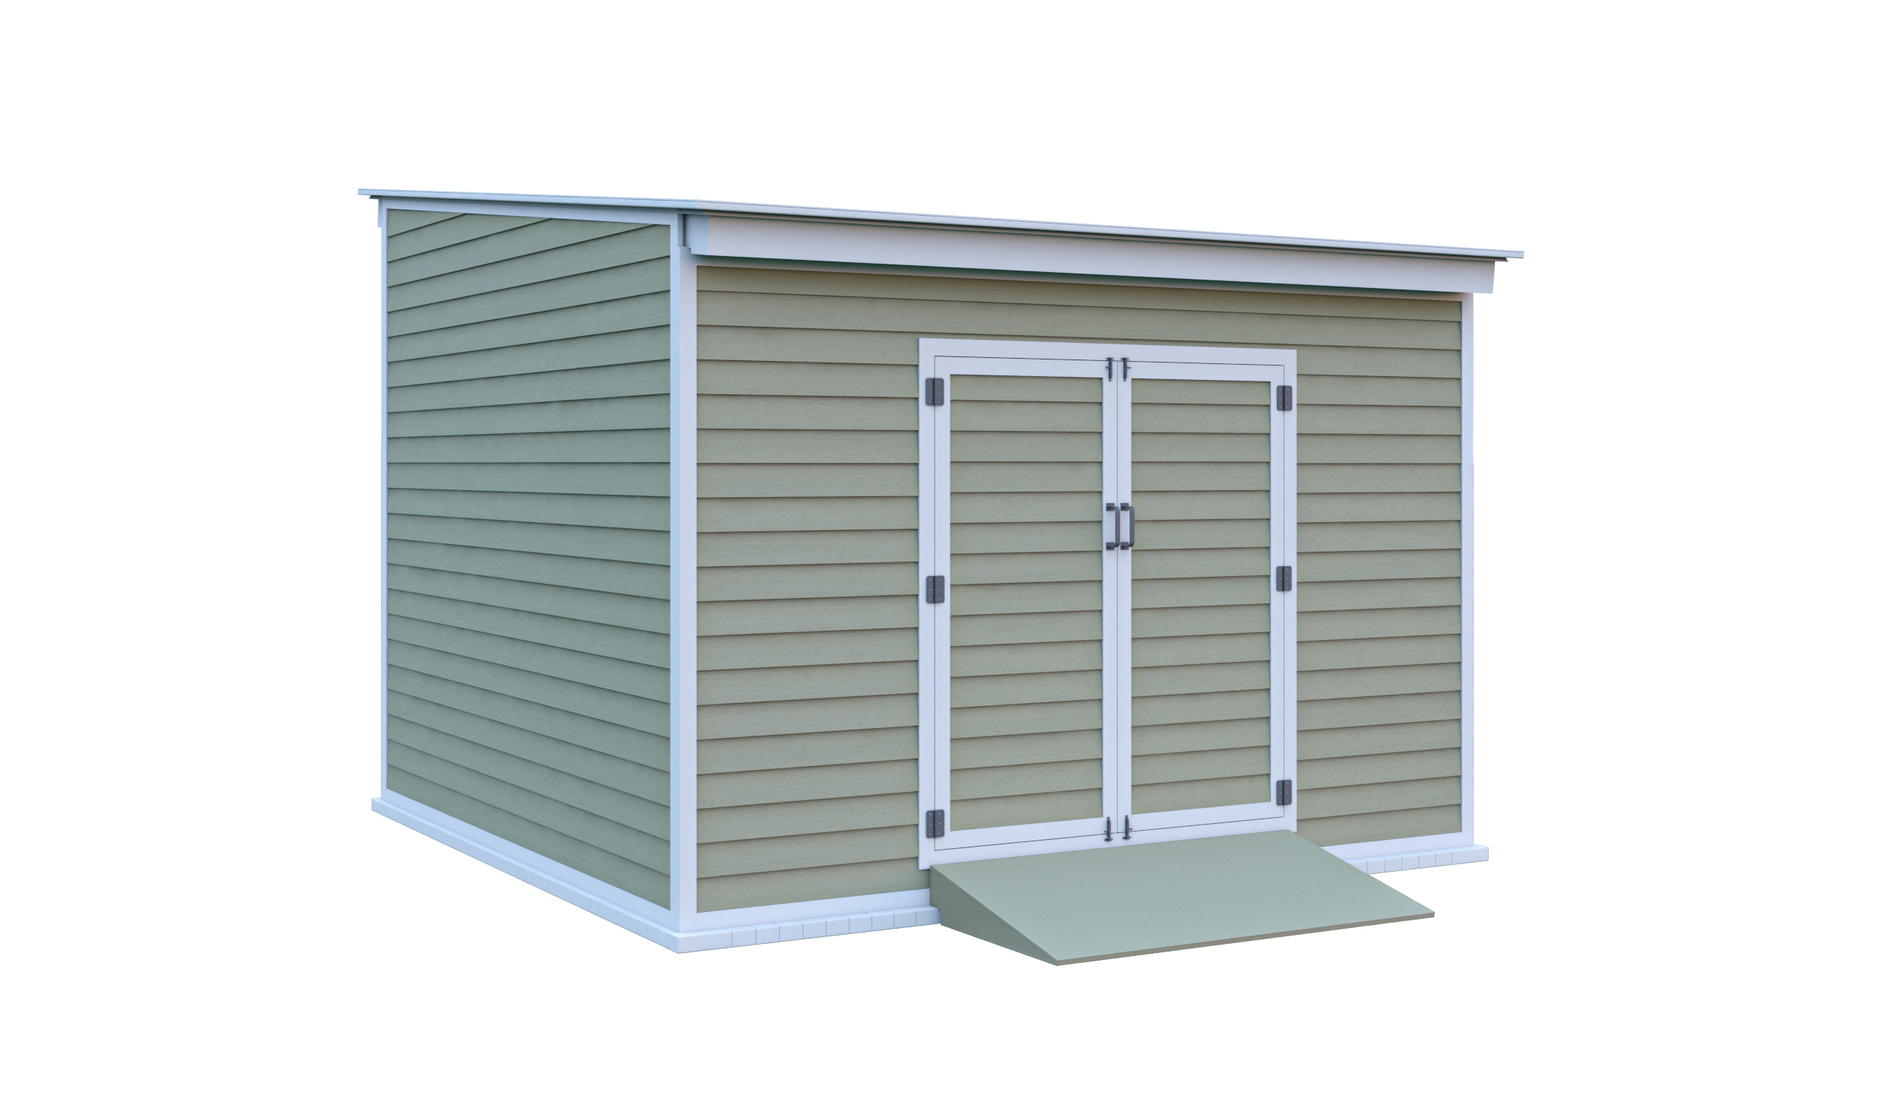 12x12 lean to storage shed